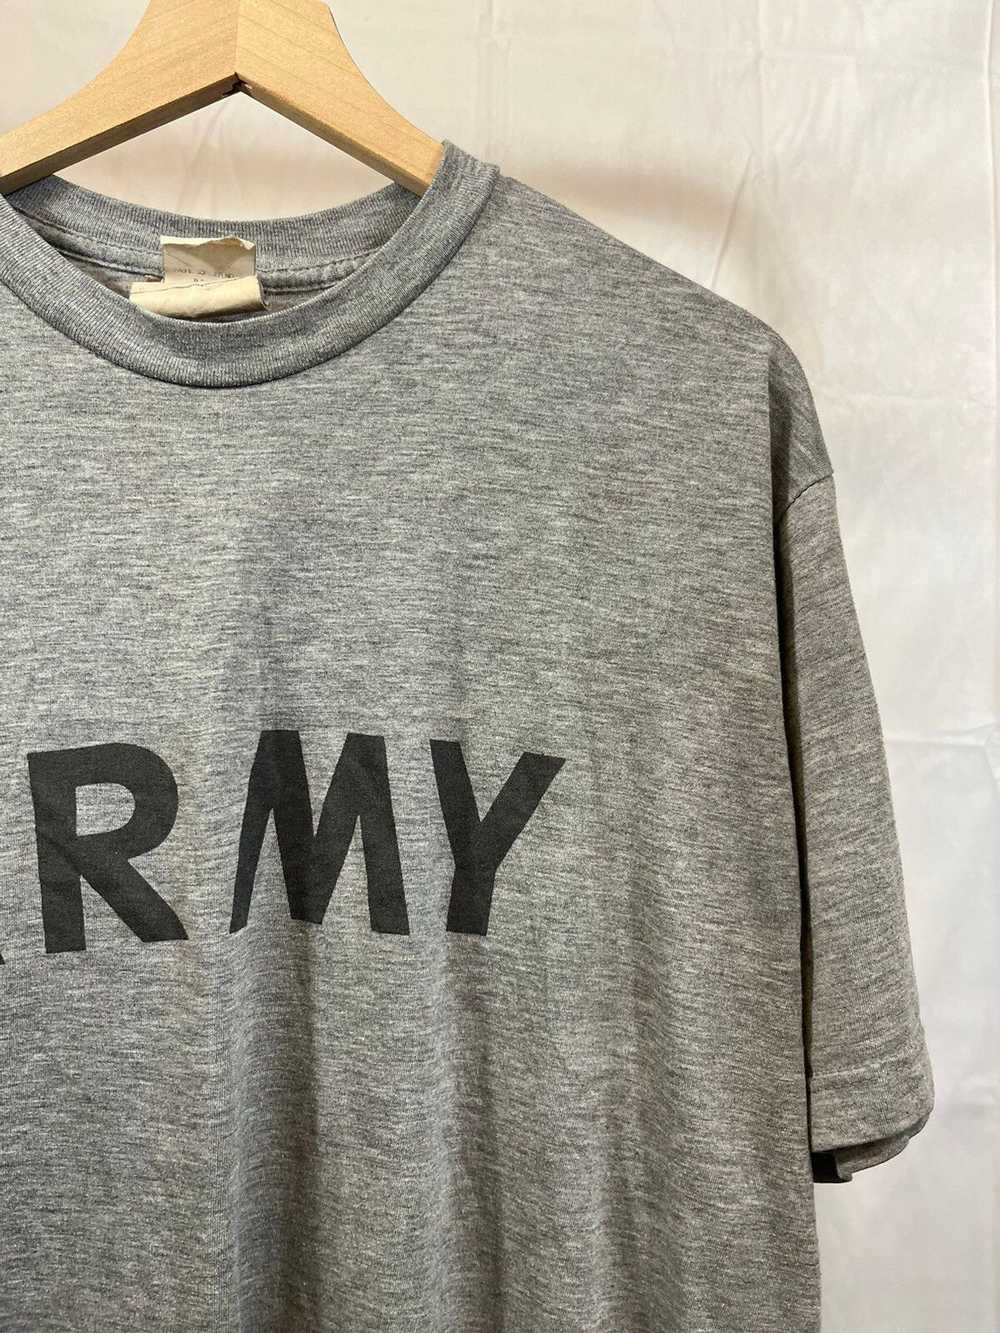 Military × Vintage Vintage ARMY Grey Thin Faded M… - image 2